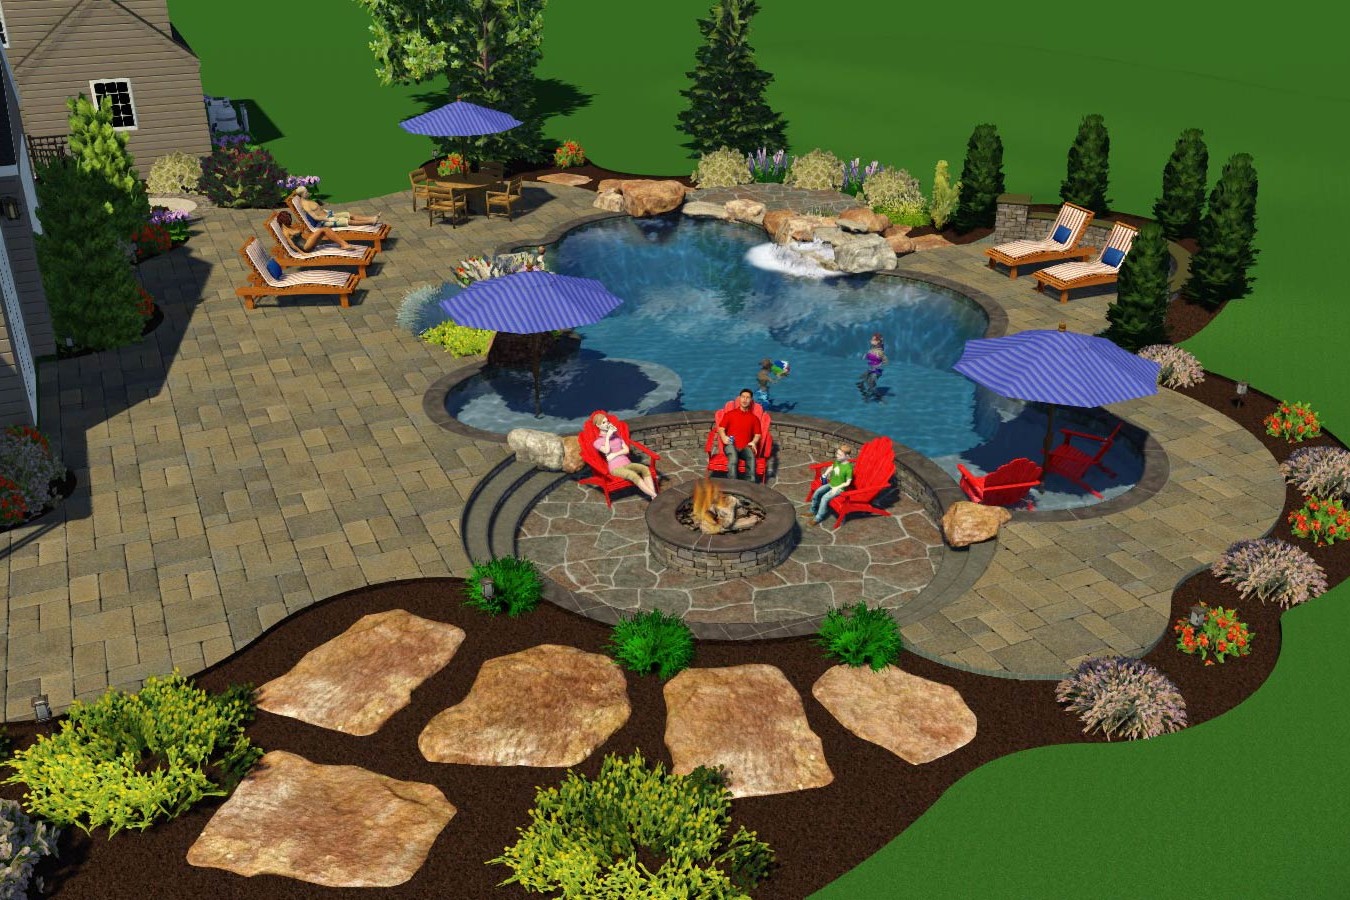 CAD render of fire pit and pool